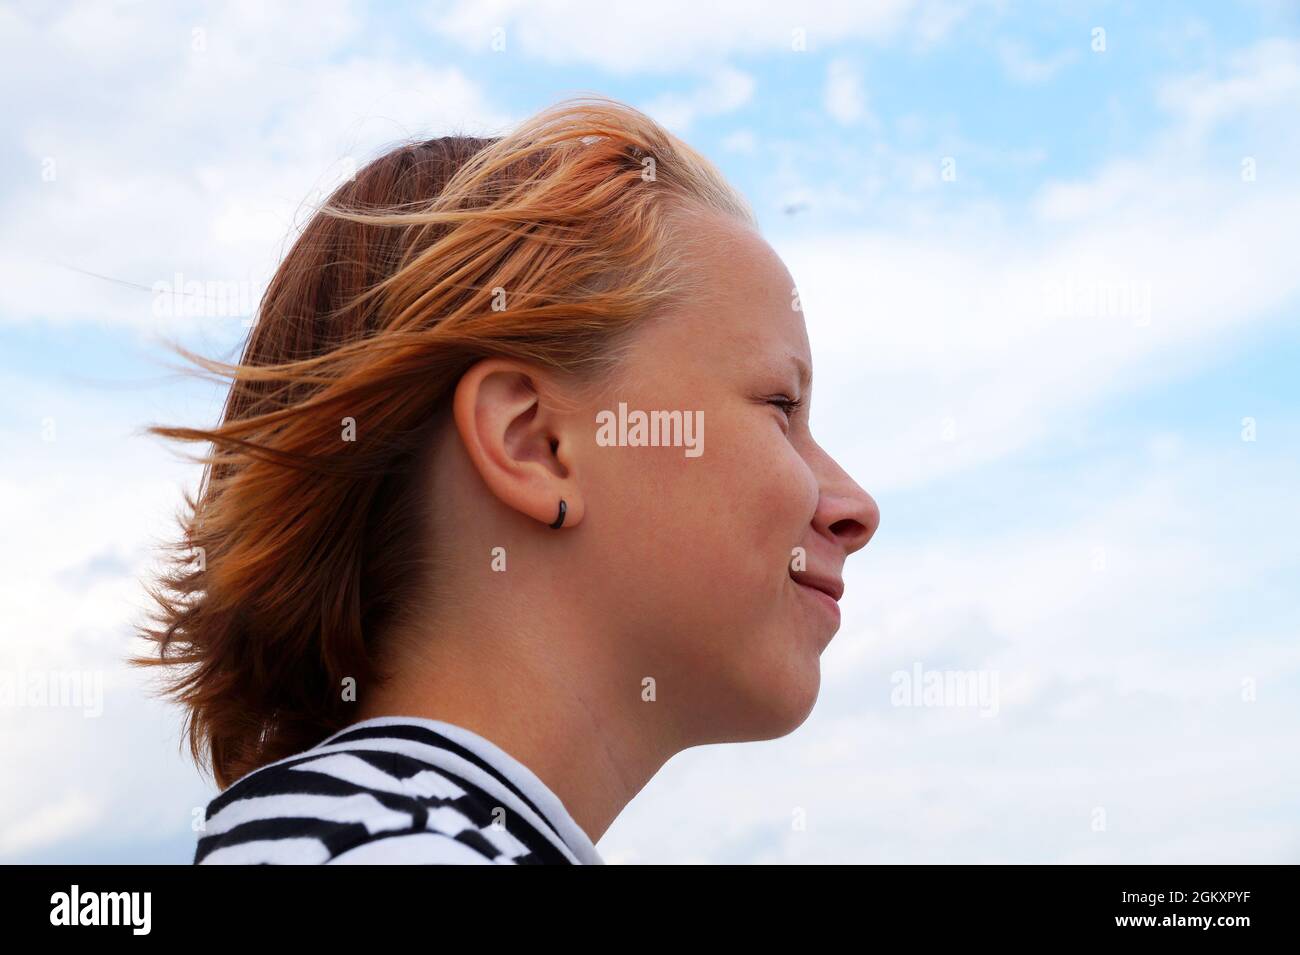 profile of smiling teenage girl with fluttering red hair against blue sky. Stock Photo